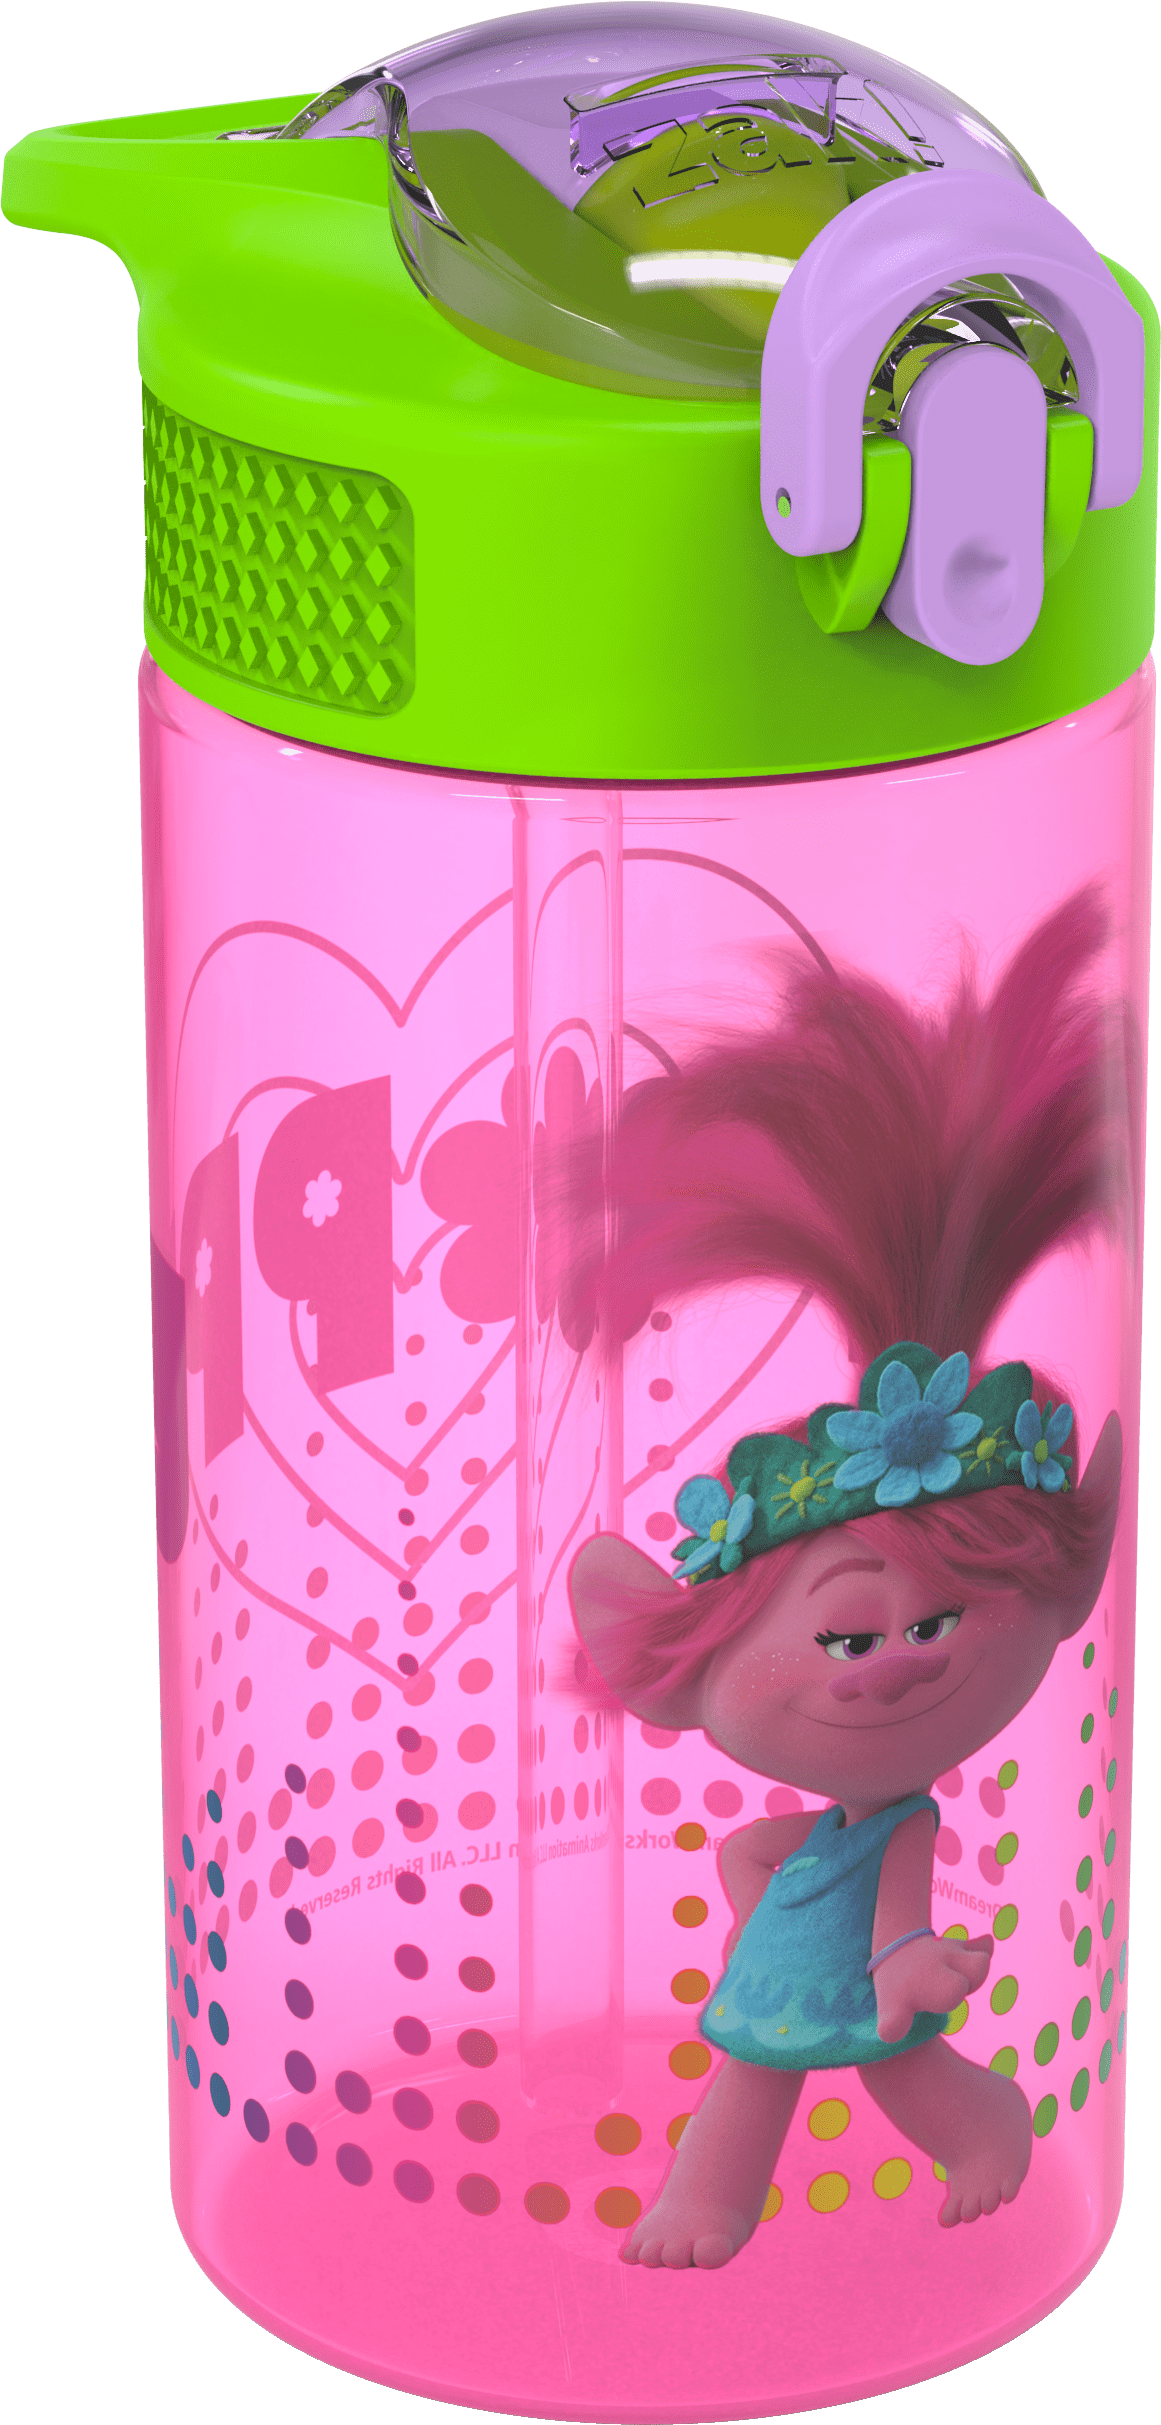 Perfect Bundle for Kids 2pc Set Zak Designs Dreamworks Trolls 2 Movie Poppy Kelso 15 oz Tumbler Set BPA-Free Leak-Proof Screw-On Lid with Straw Made of Durable Plastic and Silicone 